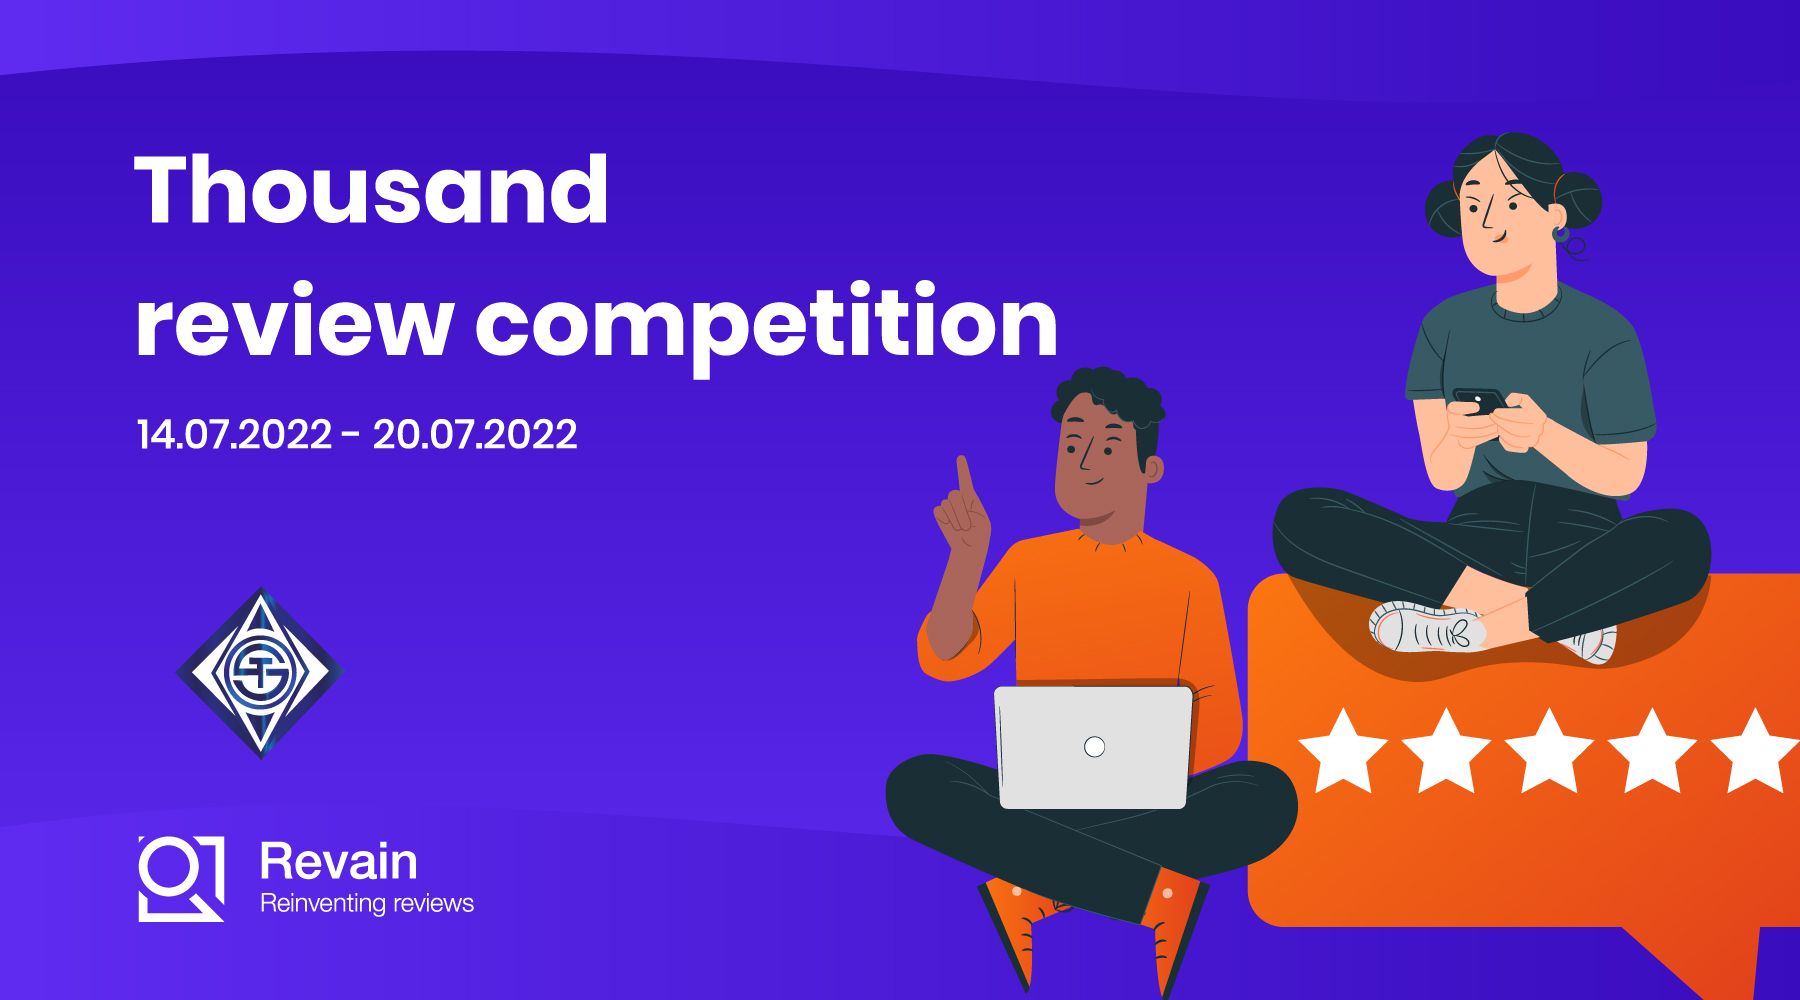 Article Thousand & Revain review competition begin!